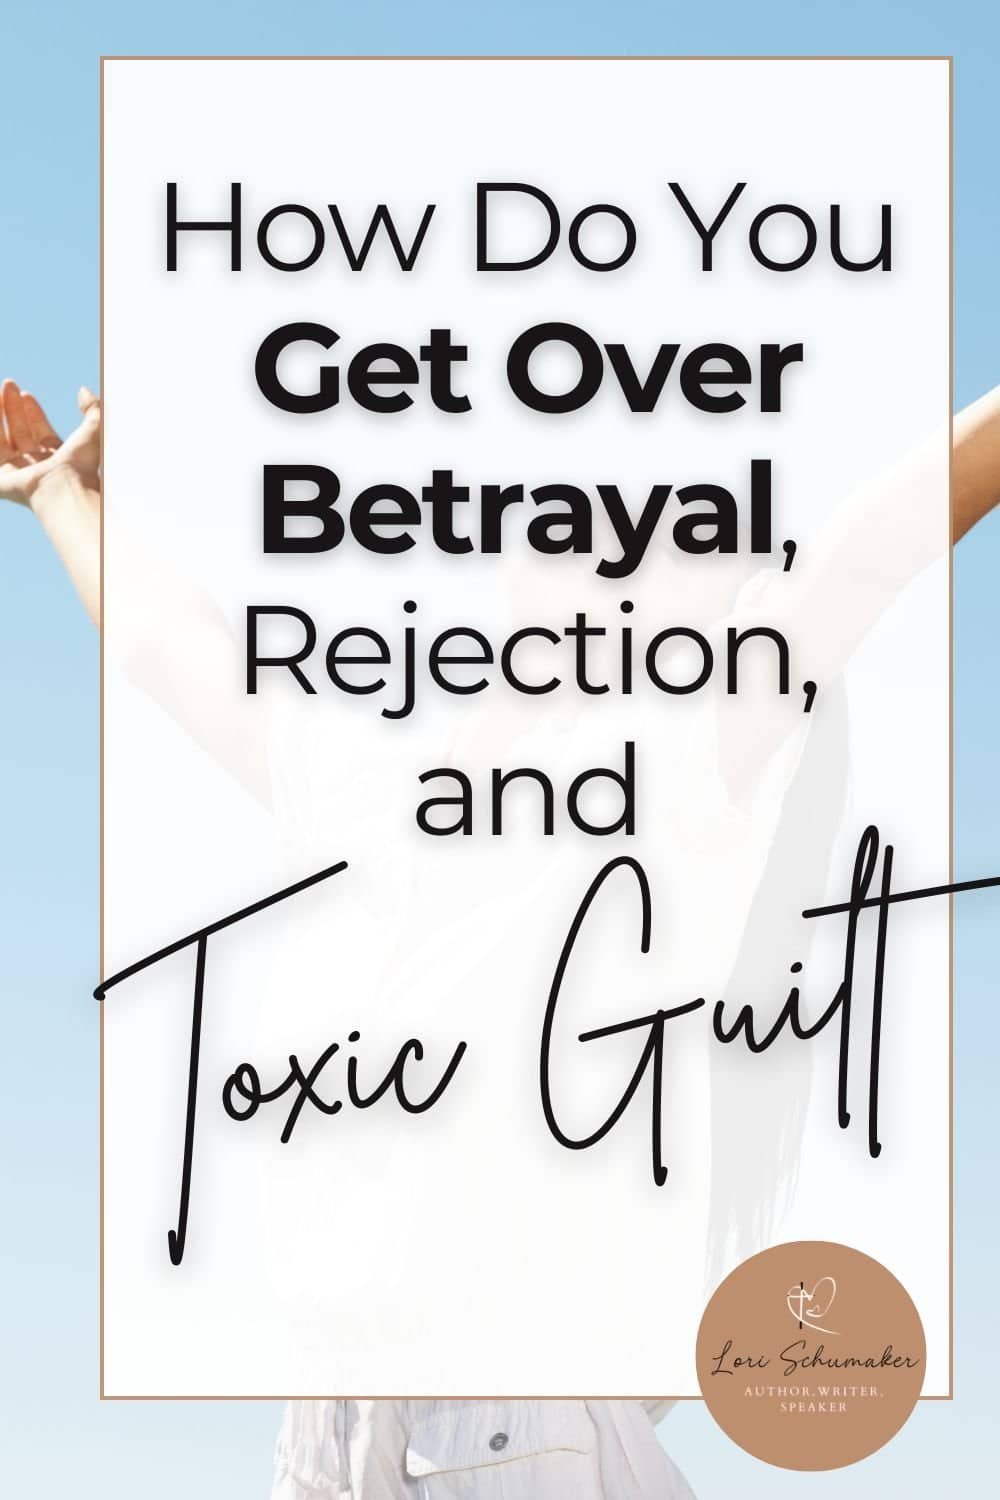 How Do You Get Over Betrayal, Rejection, and Toxic Guilt? Embrace these six truths and begin the healing process. Join us for the complete series to overcoming the pain of betrayal, rejection, and the toxic guilt that often arises from an abuser's manipulation.